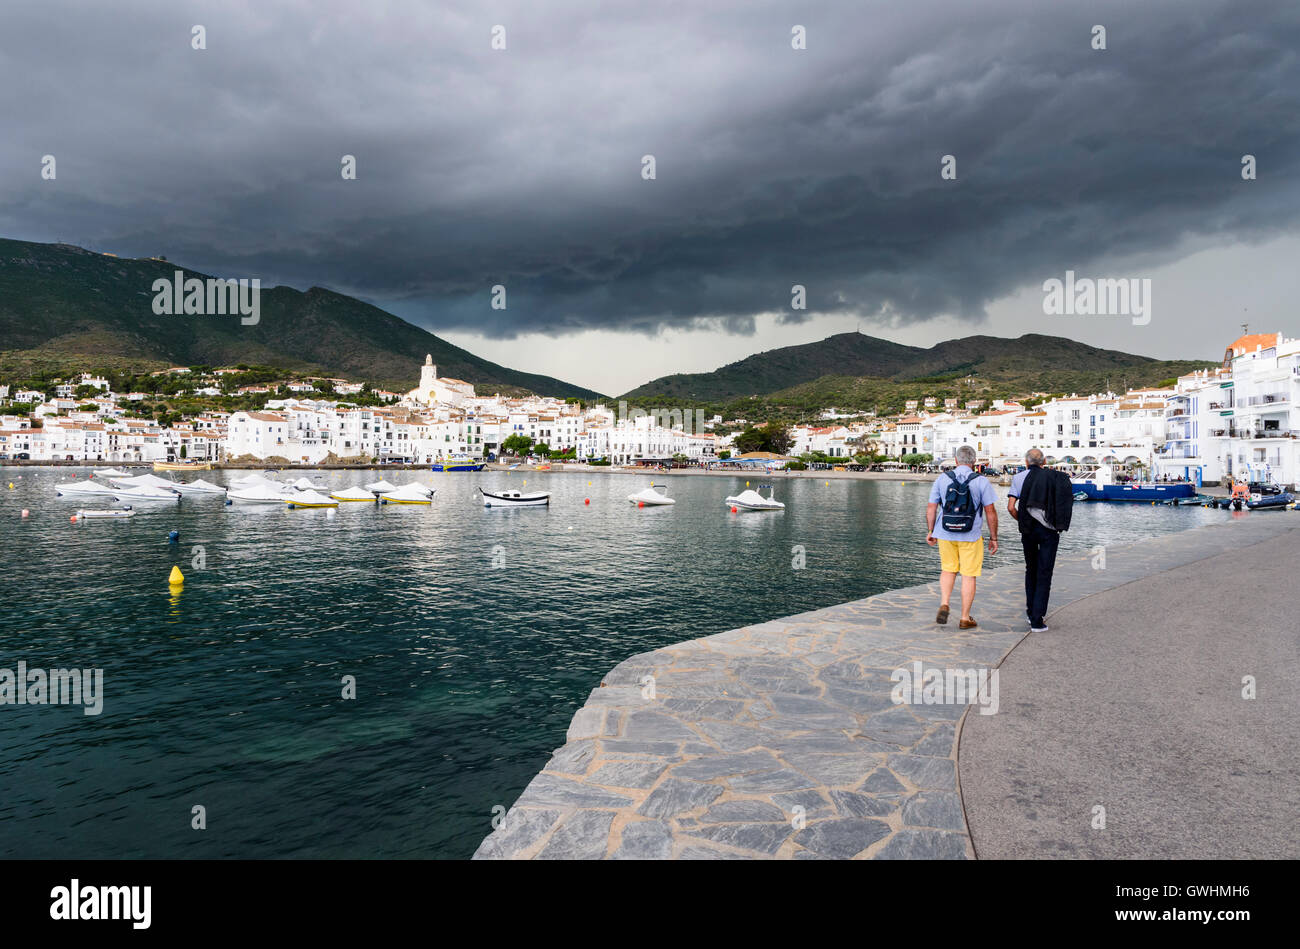 Dark storm clouds gather over the picturesque white town of Cadaques on the Costa Brava, Spain Stock Photo